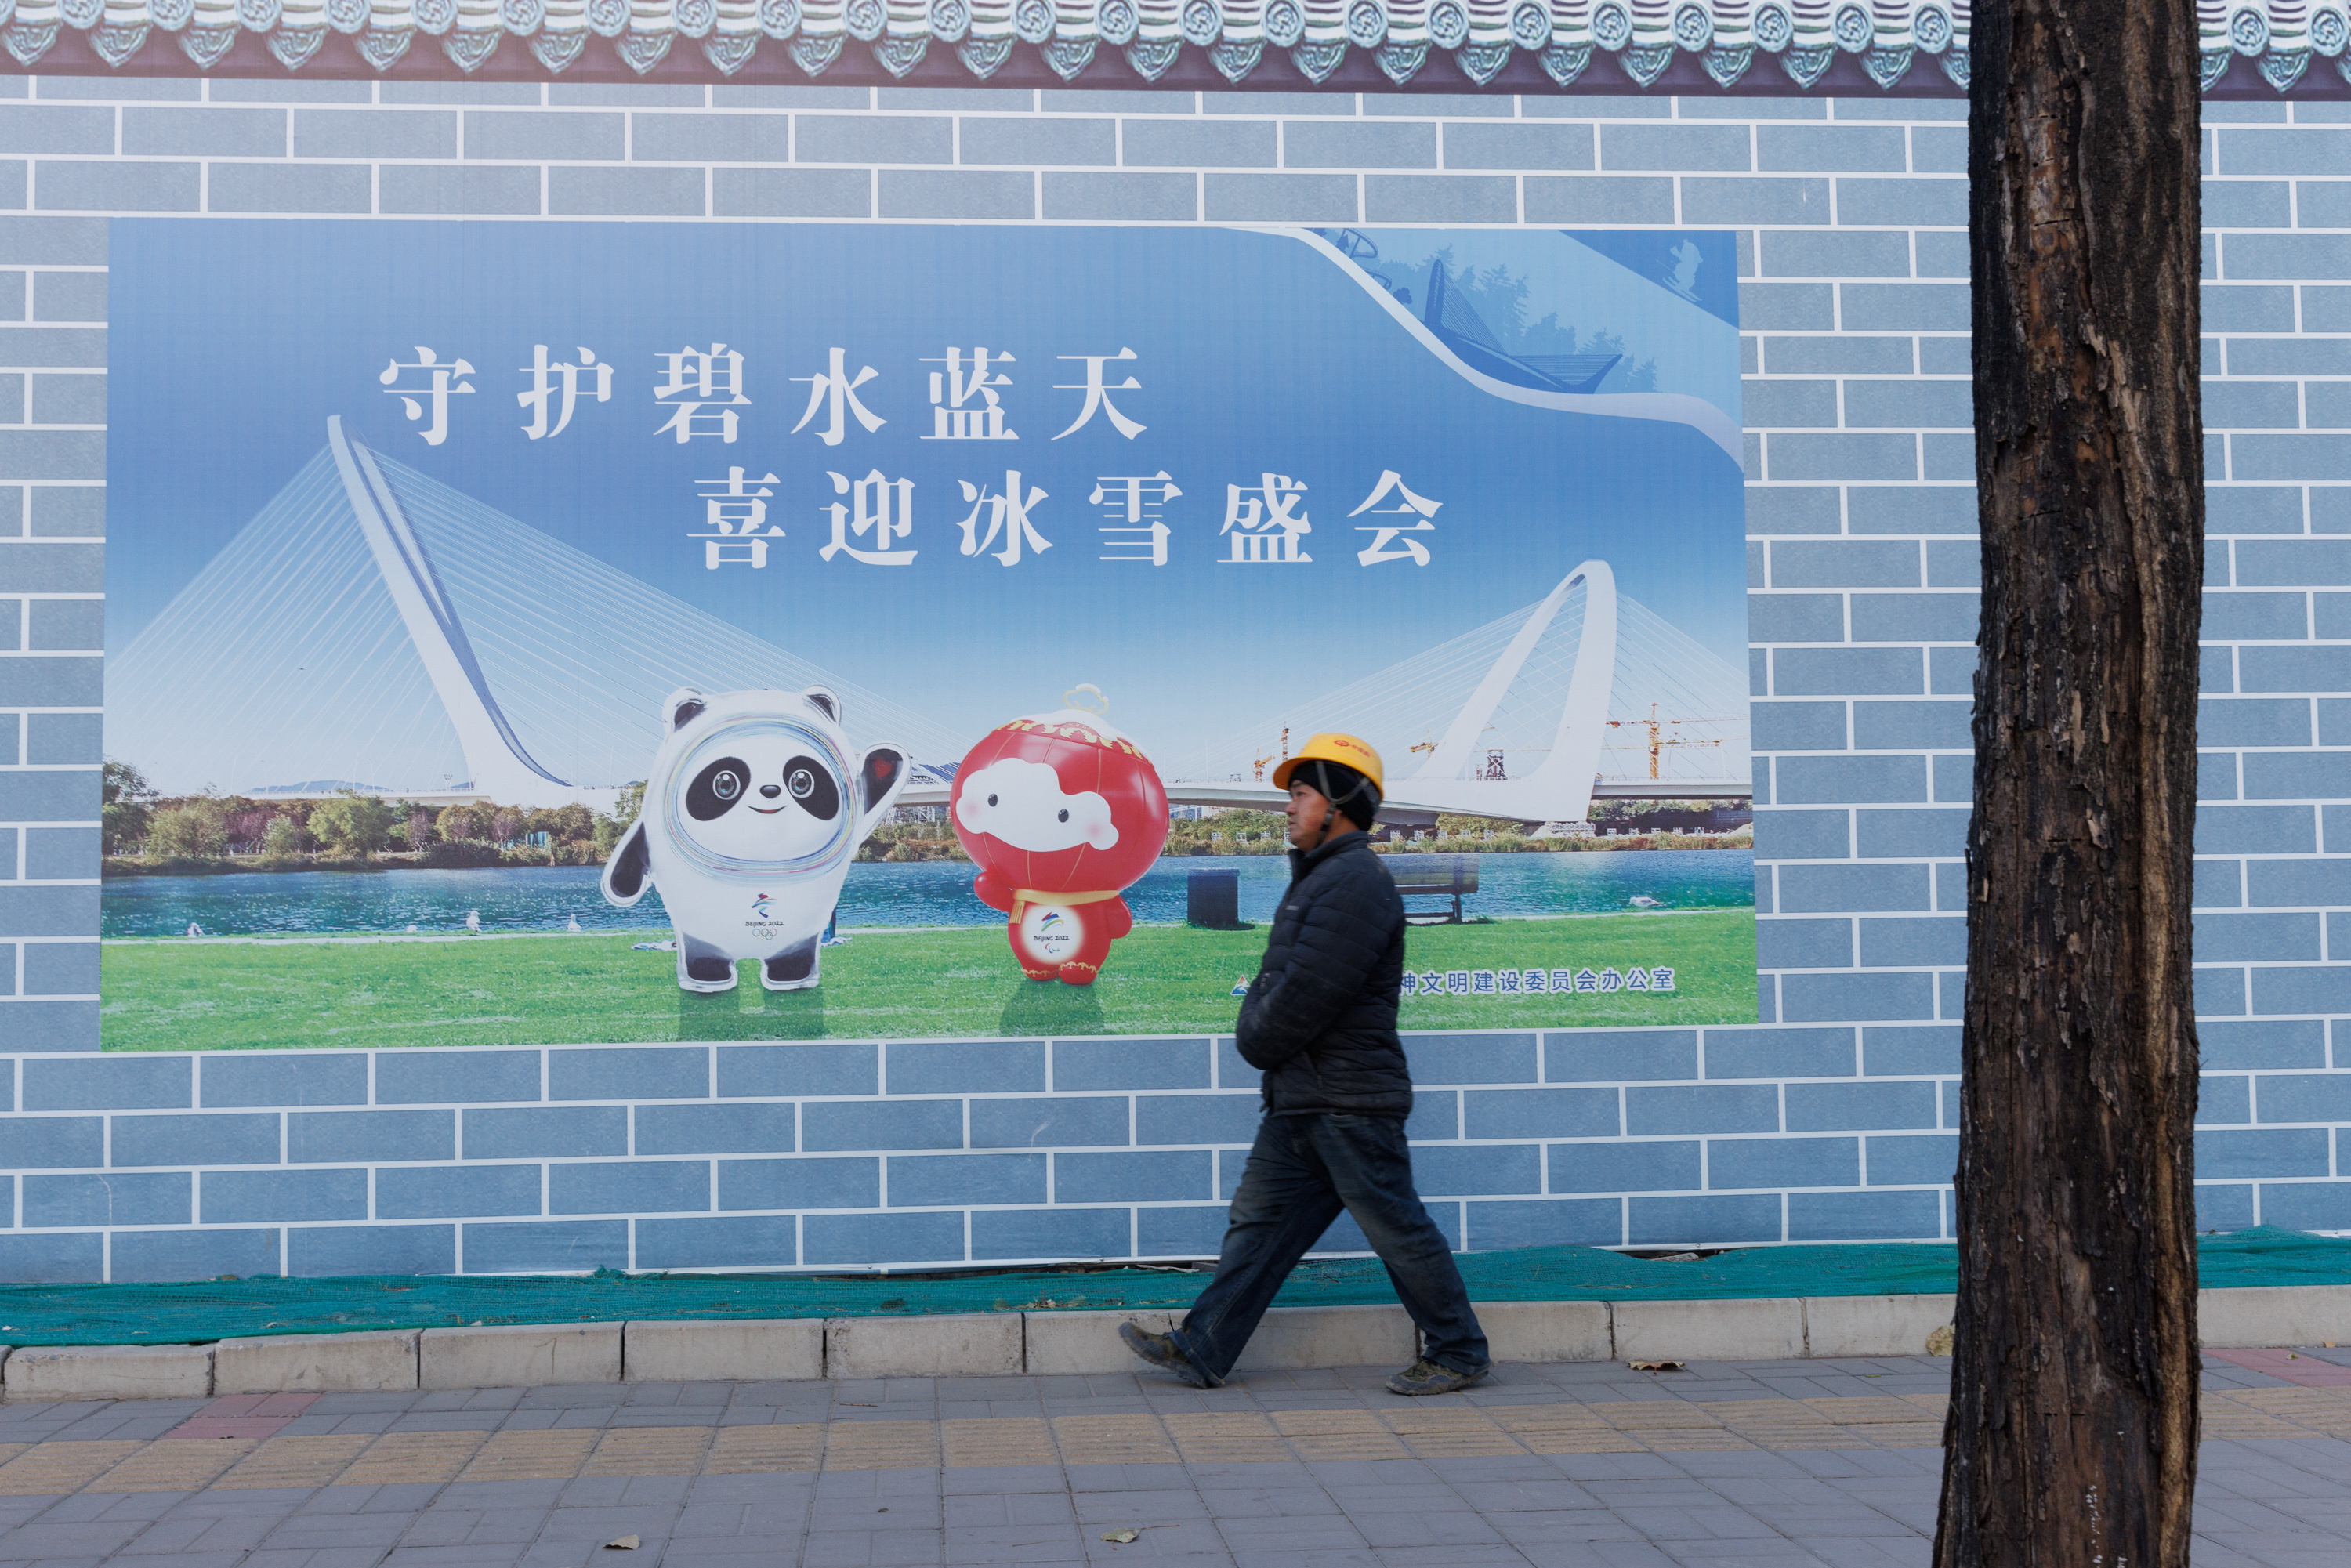 A worker walks past a poster showing the mascots of the Beijing 2022 Olympic and Paralympic Winter Games in Beijing